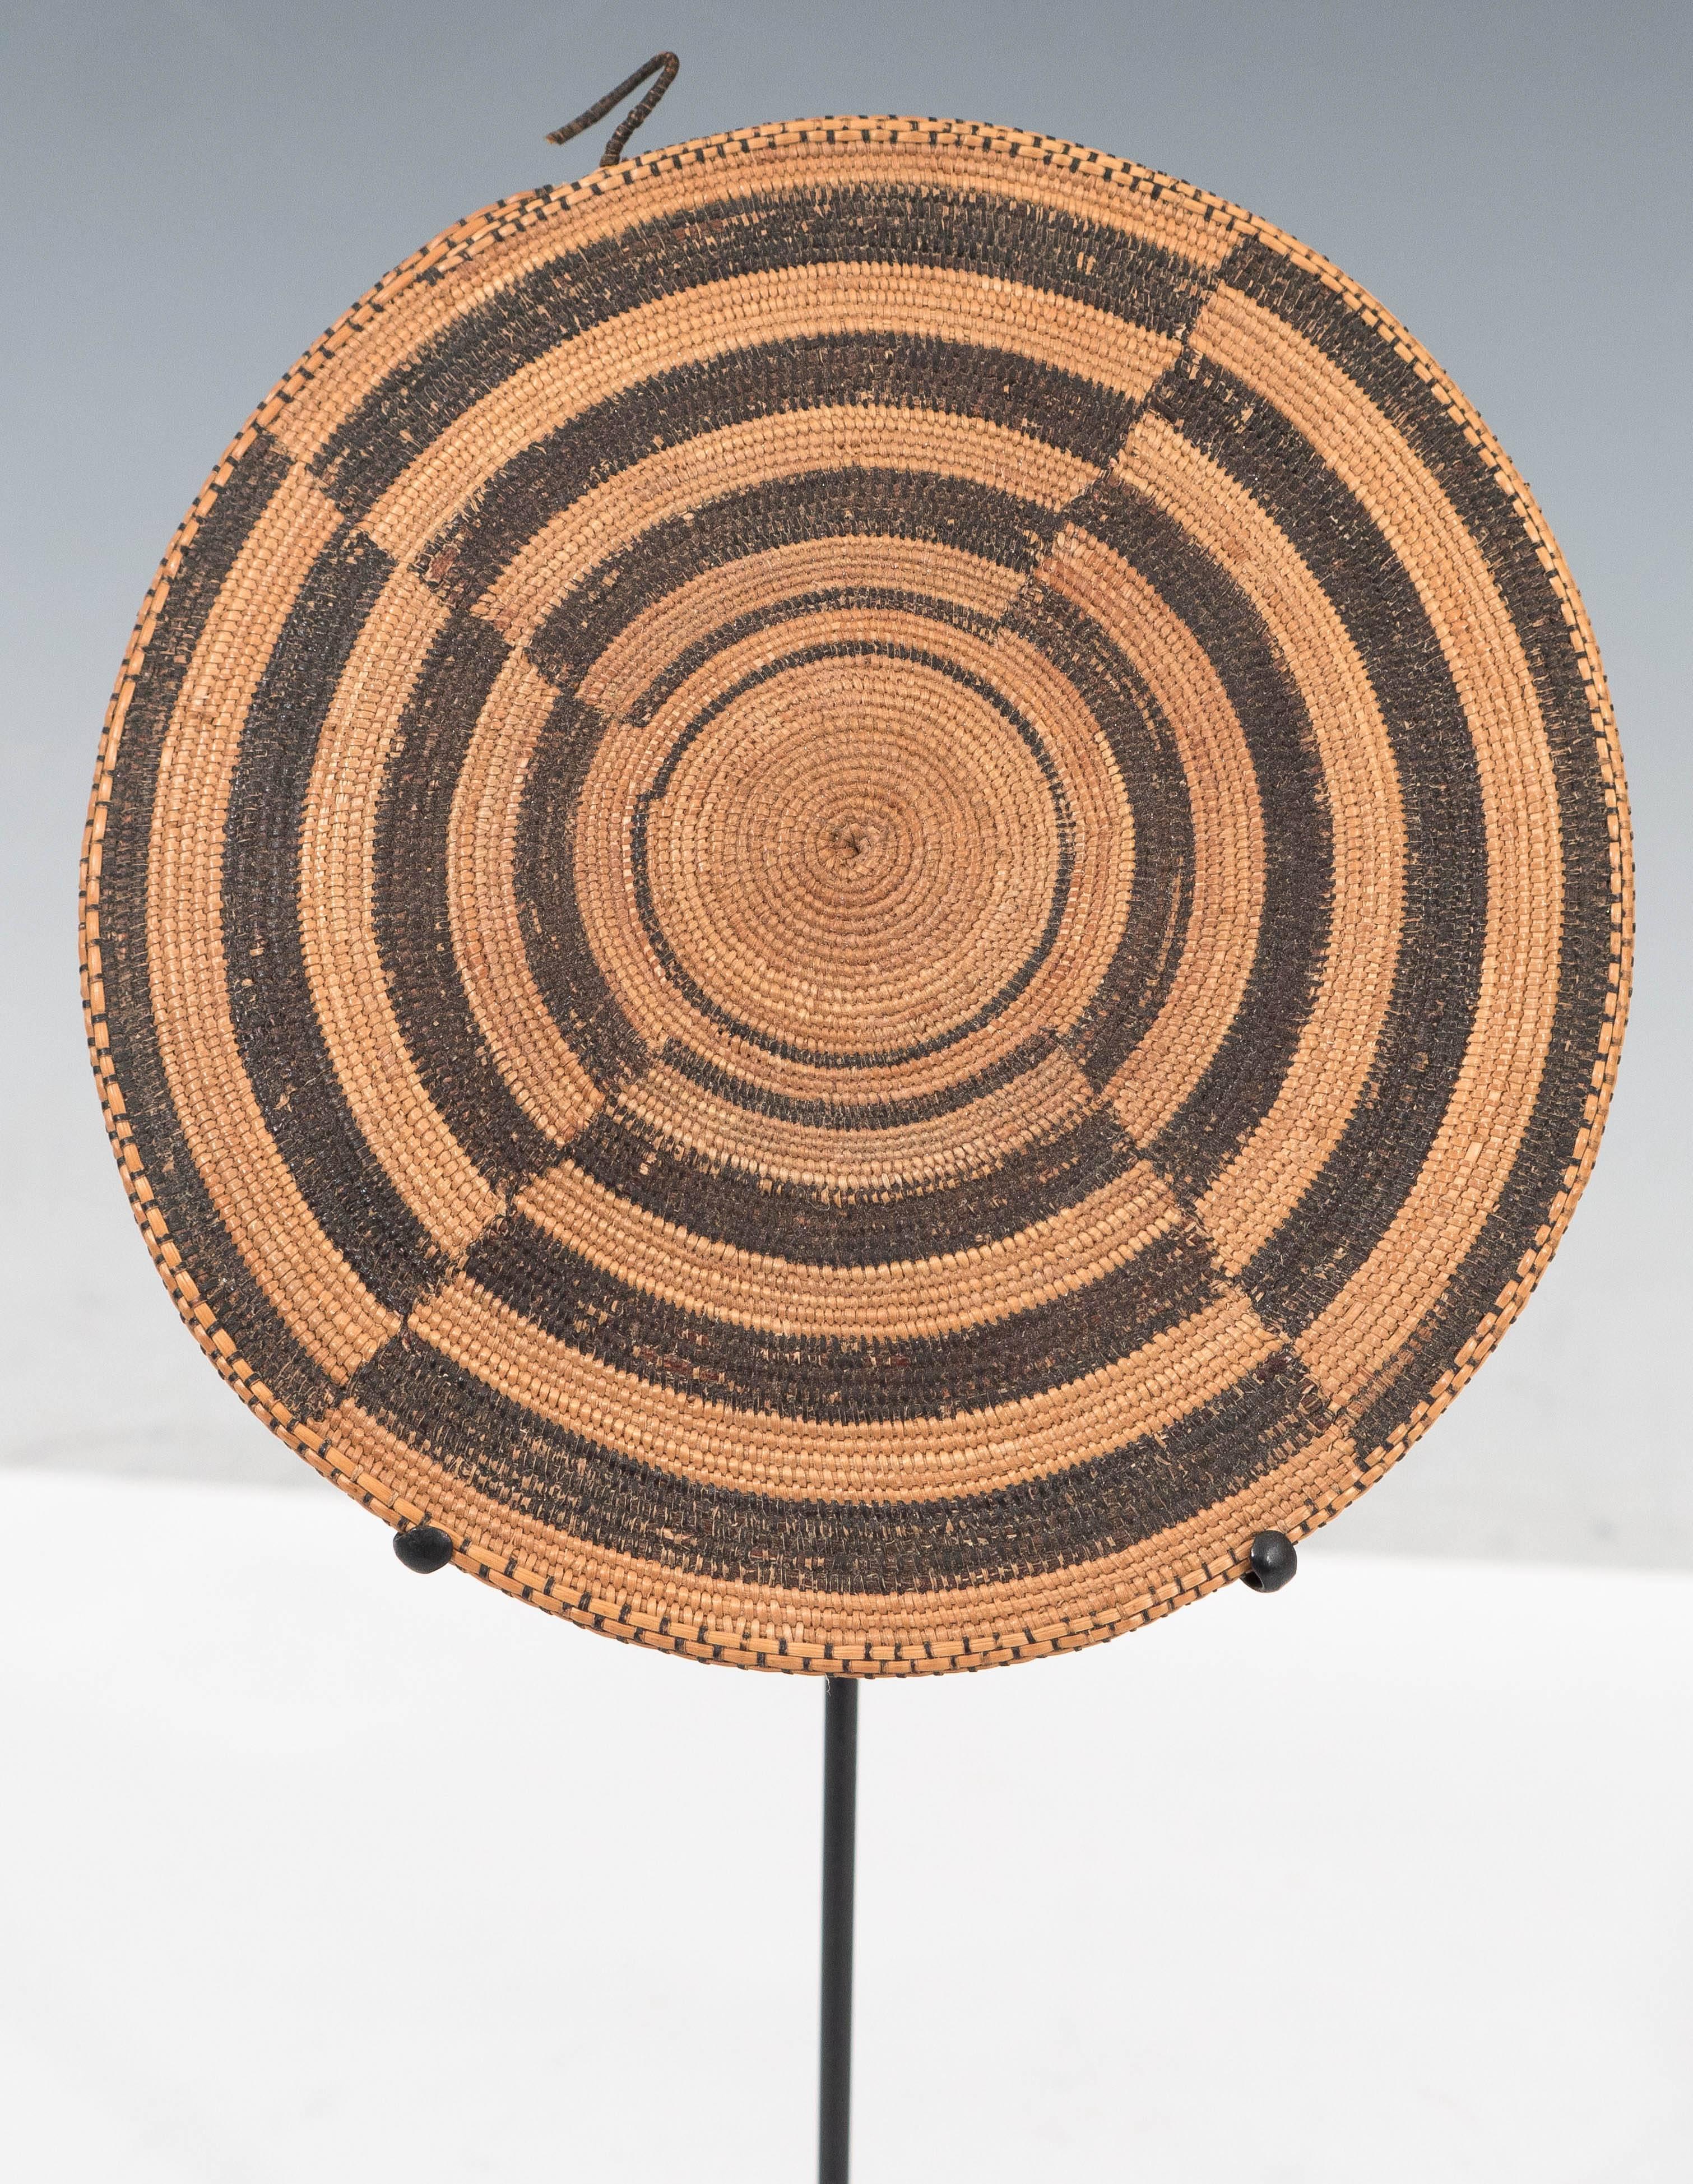 A hand-woven rattan cane disc, with dyed black patterns, supported on a metal stand, will add a natural and environmental touch to the interior setting. Very good condition, consistent with age.